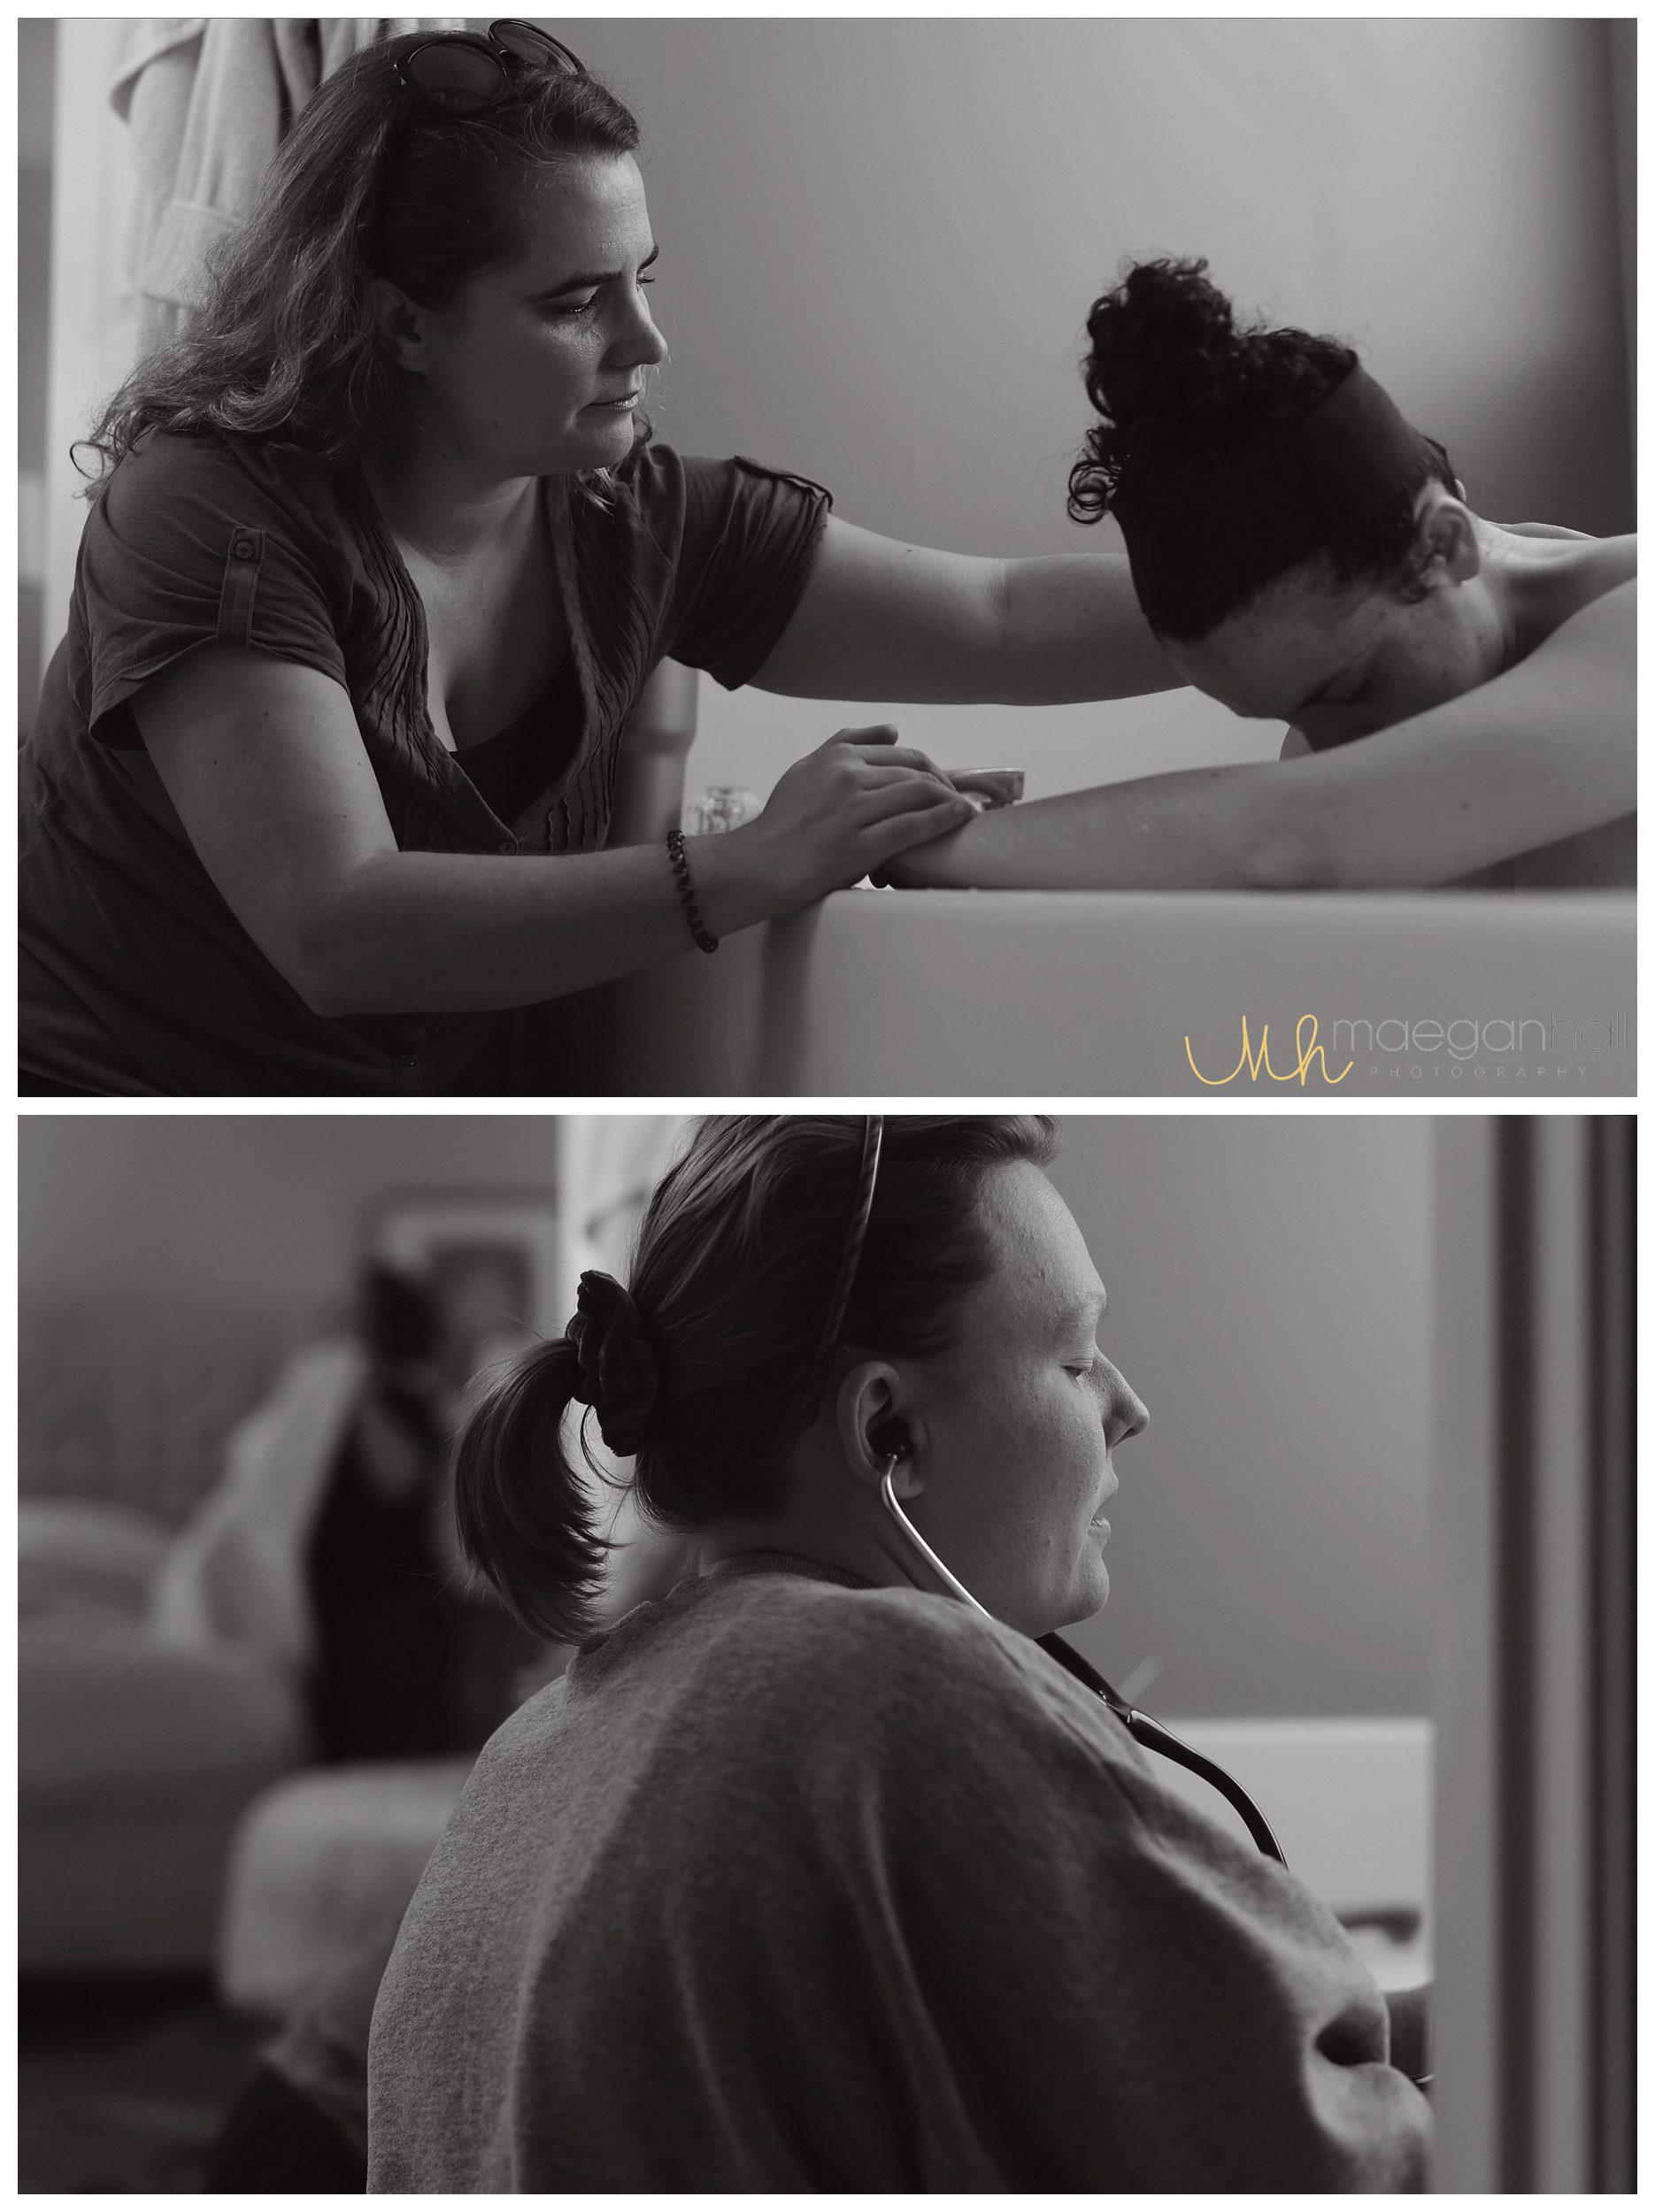 atlanta-home-birth-photography-pictures-dawning-life-midwifery-debbie-midwife-maegan-hall-canton-doula_0003